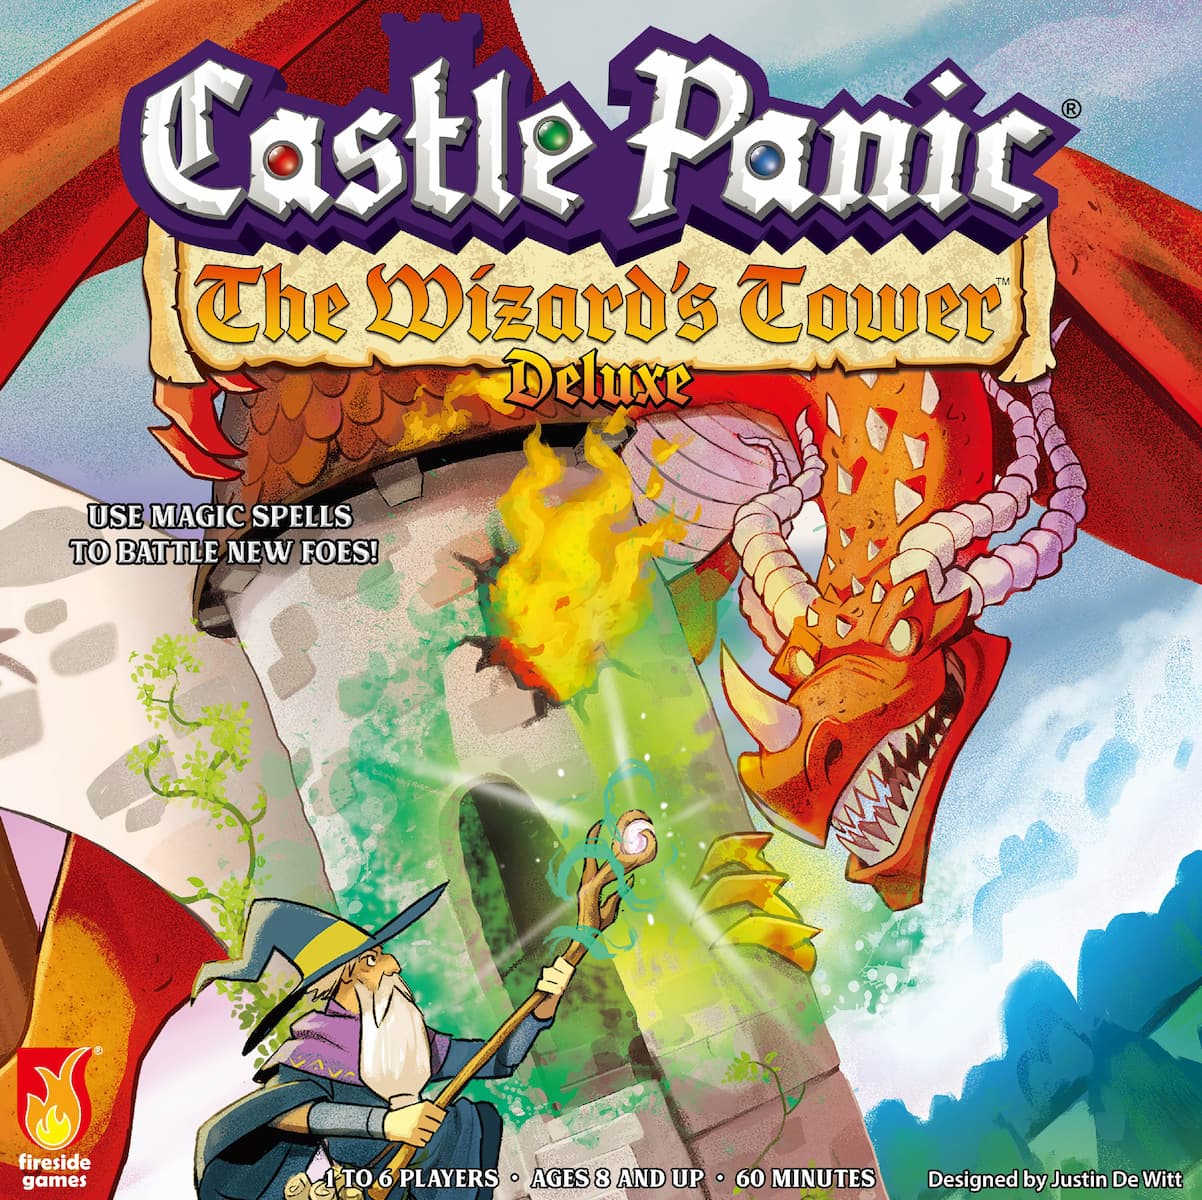 Castle Panic: The Wizard's Tower Deluxe the board game was manufactured by Boda Games Manufacturing.